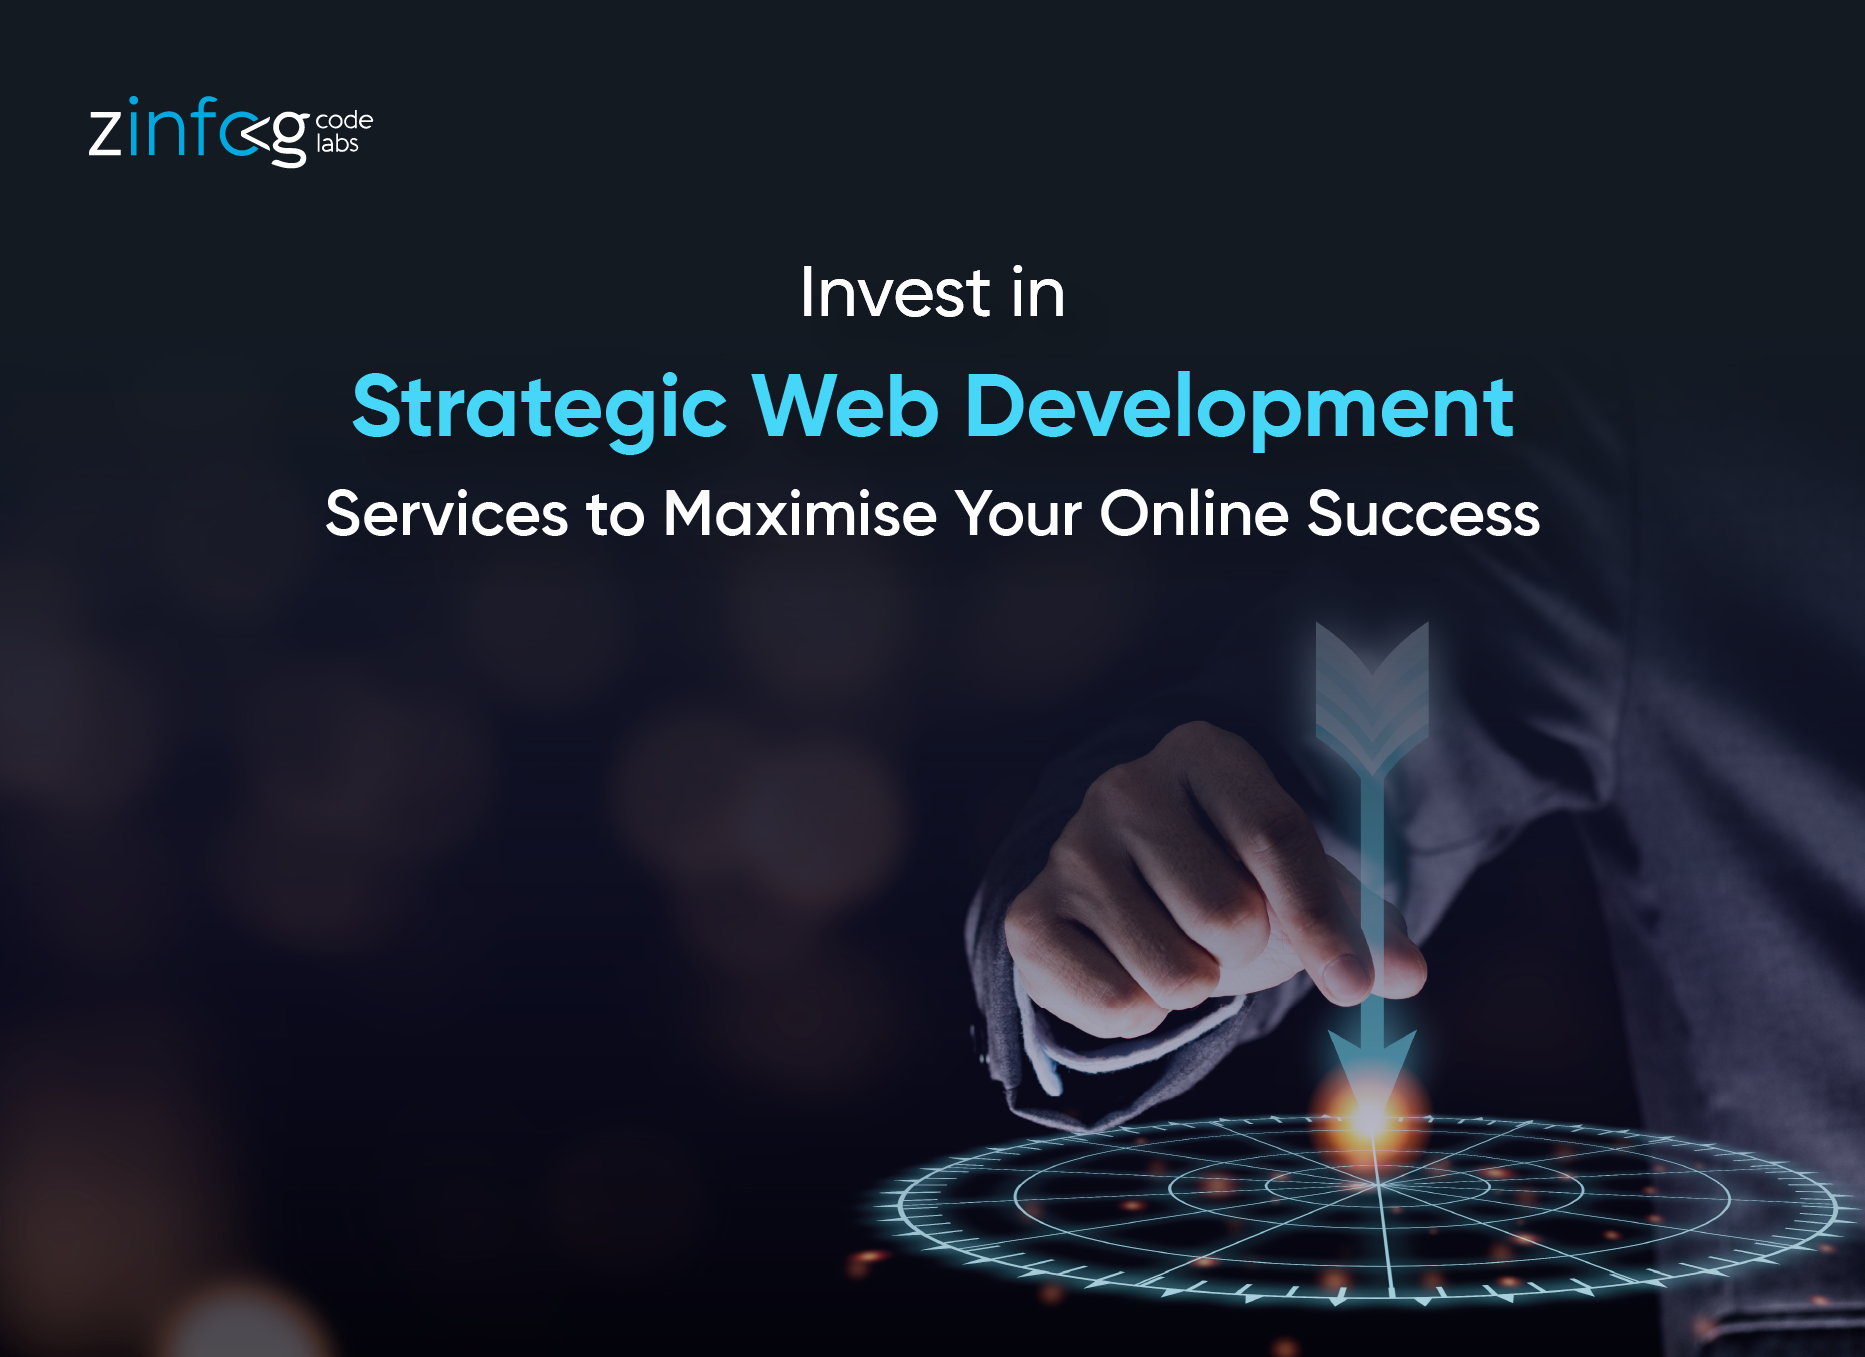 invest-in-strategic-web-development-services-to-maximise-your-online-success.html